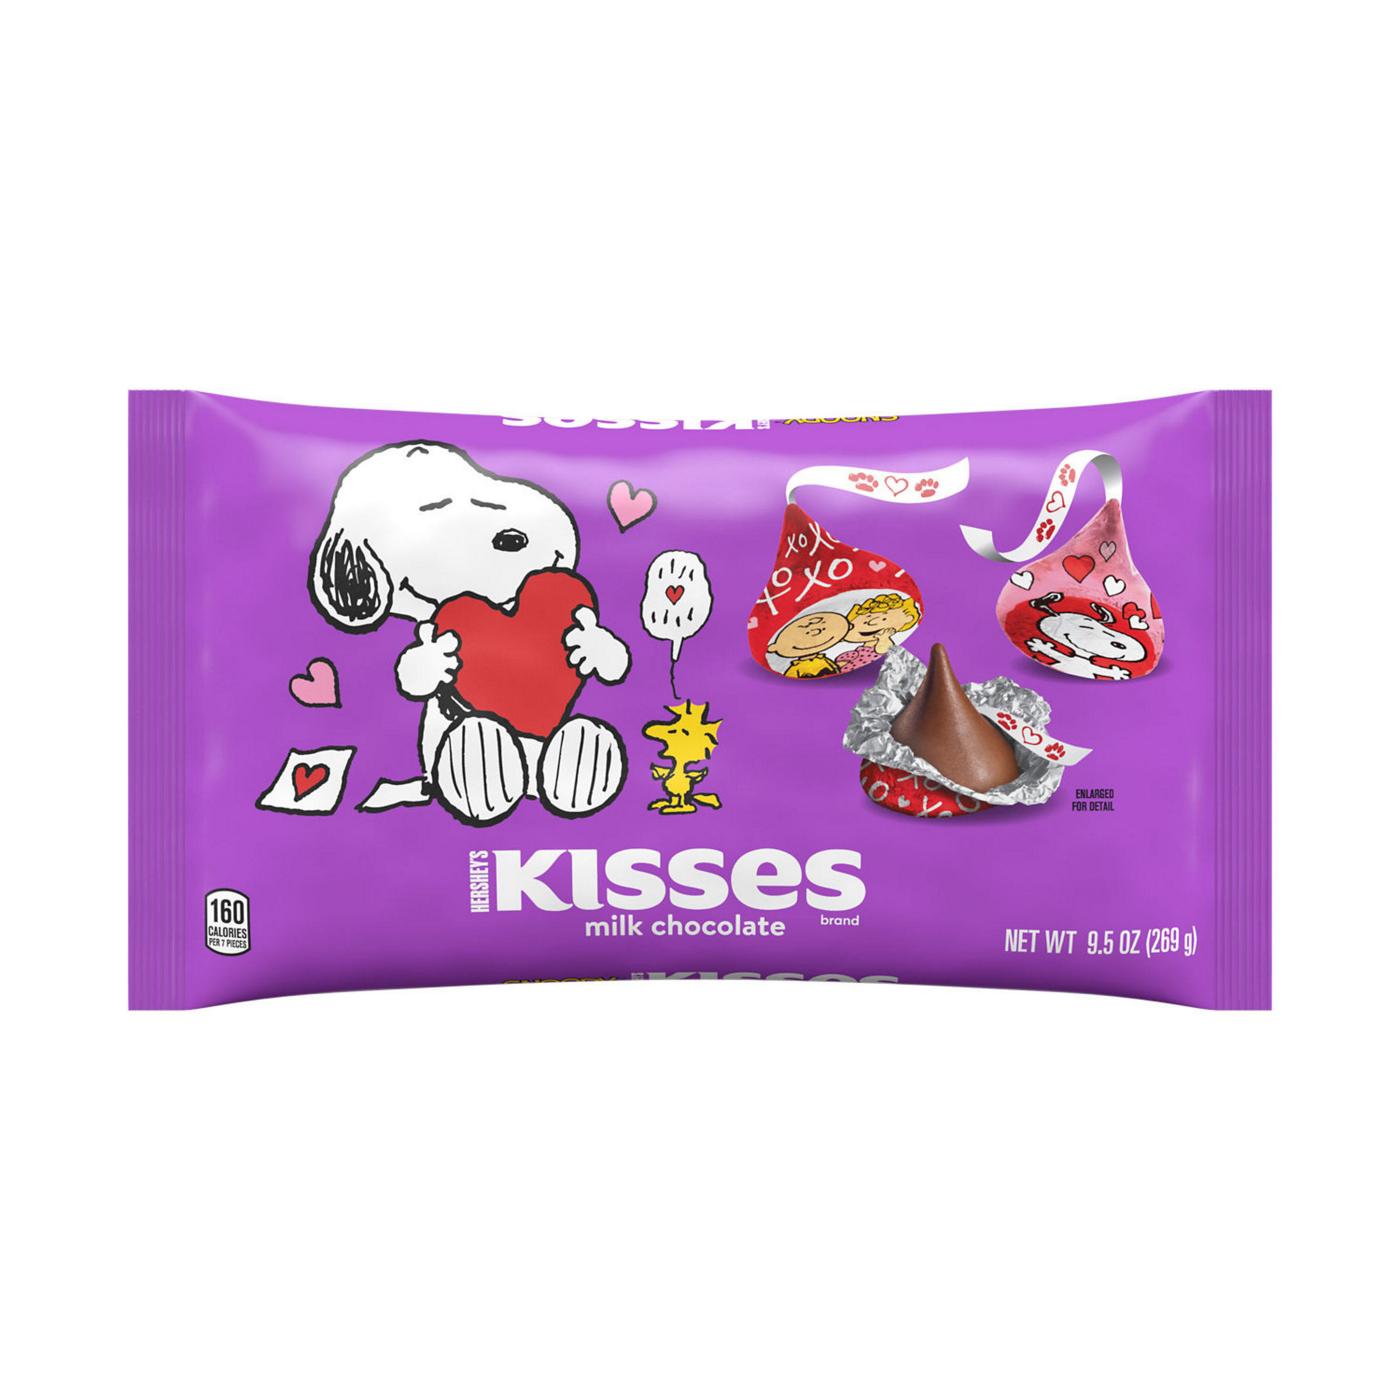 Hershey's Kisses Snoopy & Friends Milk Chocolate Candy; image 1 of 7